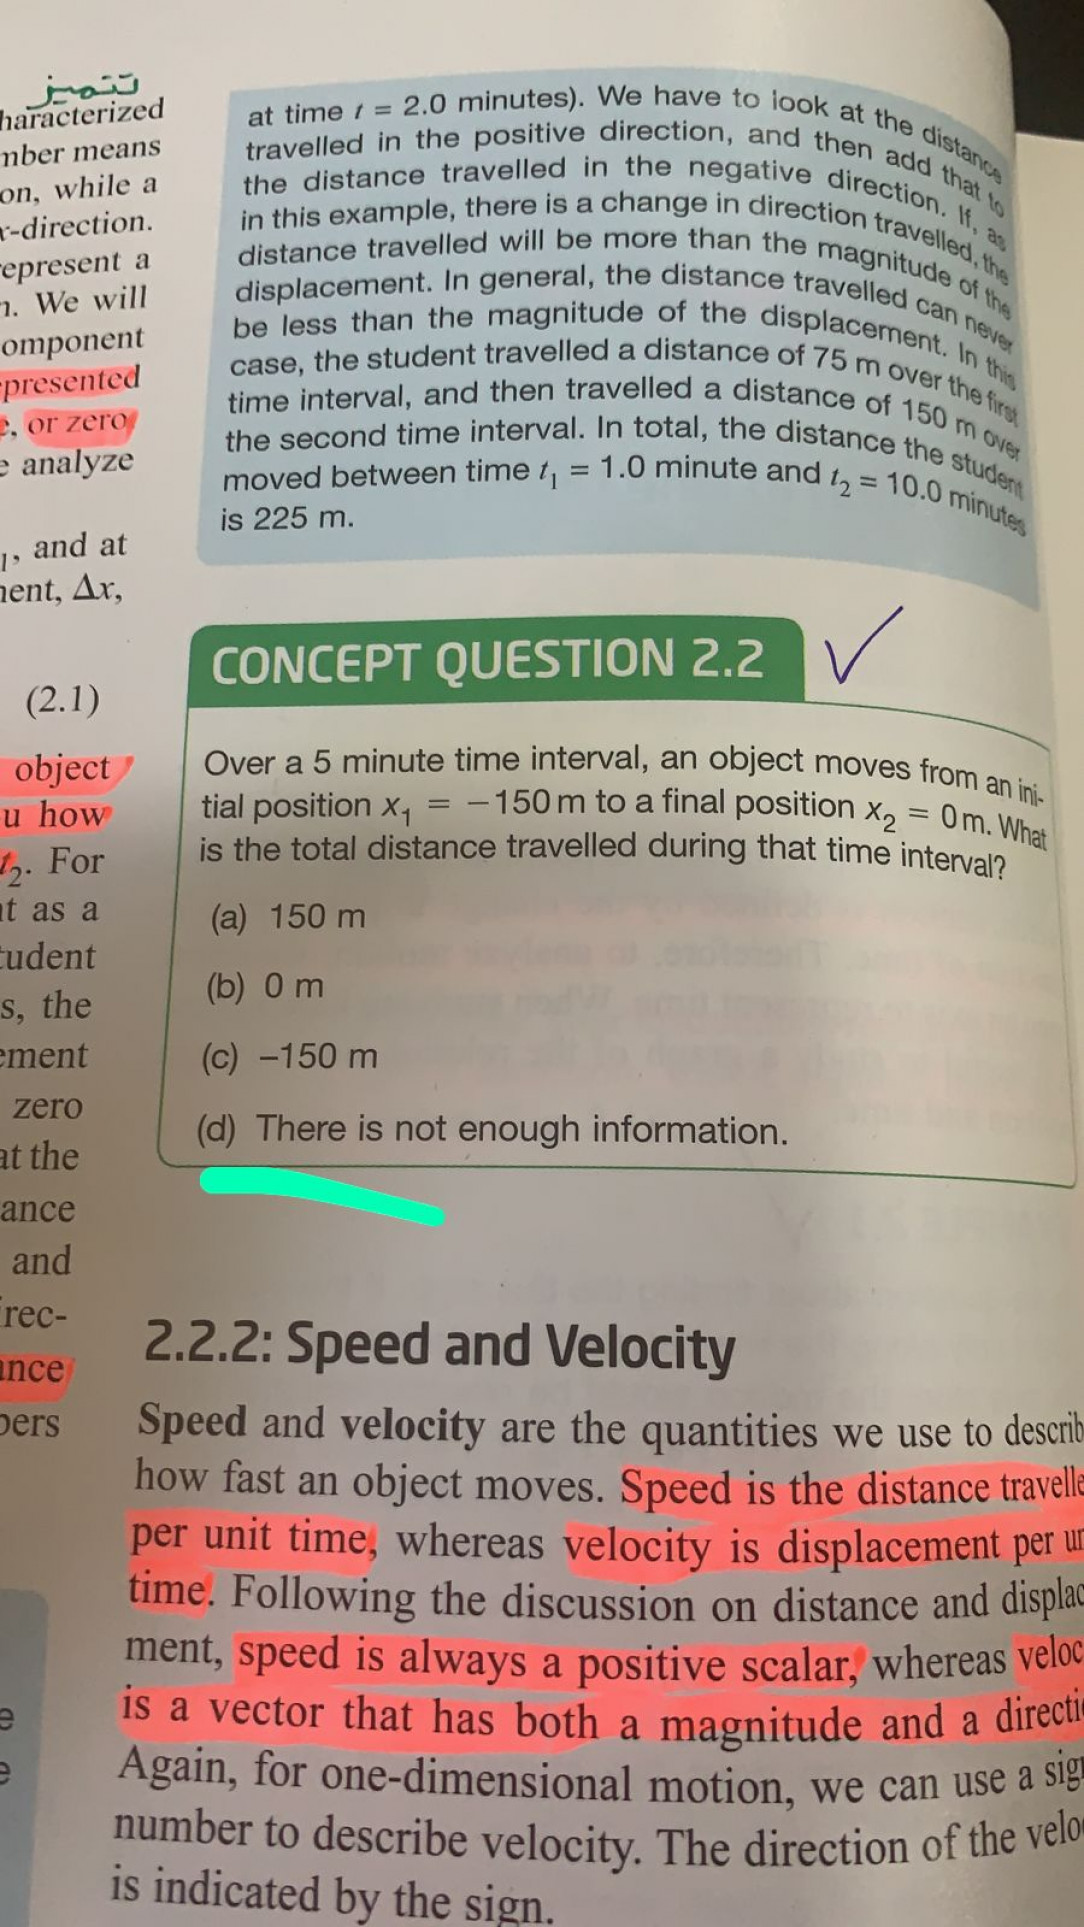 Guys I want to ask about this, is this the answer D or A?